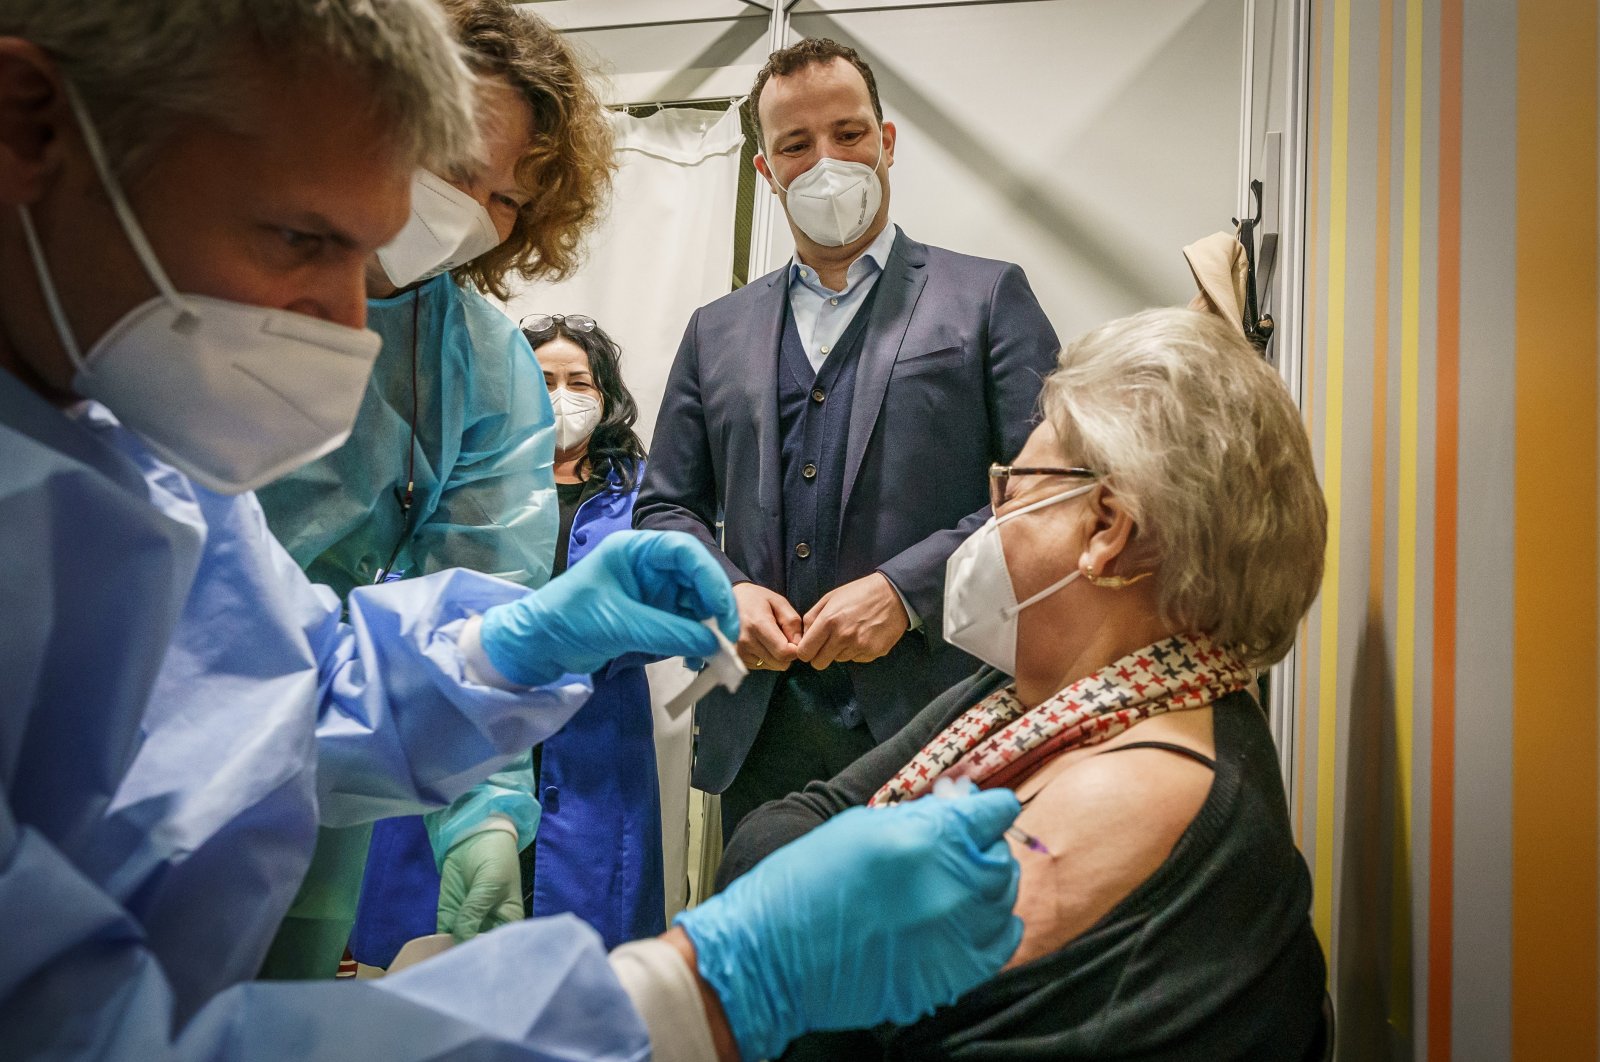 German Health Minister Jens Spahn watches doctor Tim Ratzloff vaccinate 80-year-old Rosemarie Langwald with the second dose of the Pfizer-BioNTech COVID-19 vaccine at the fairgrounds in Berlin, Germany, April 5, 2021. (Reuters Photo)